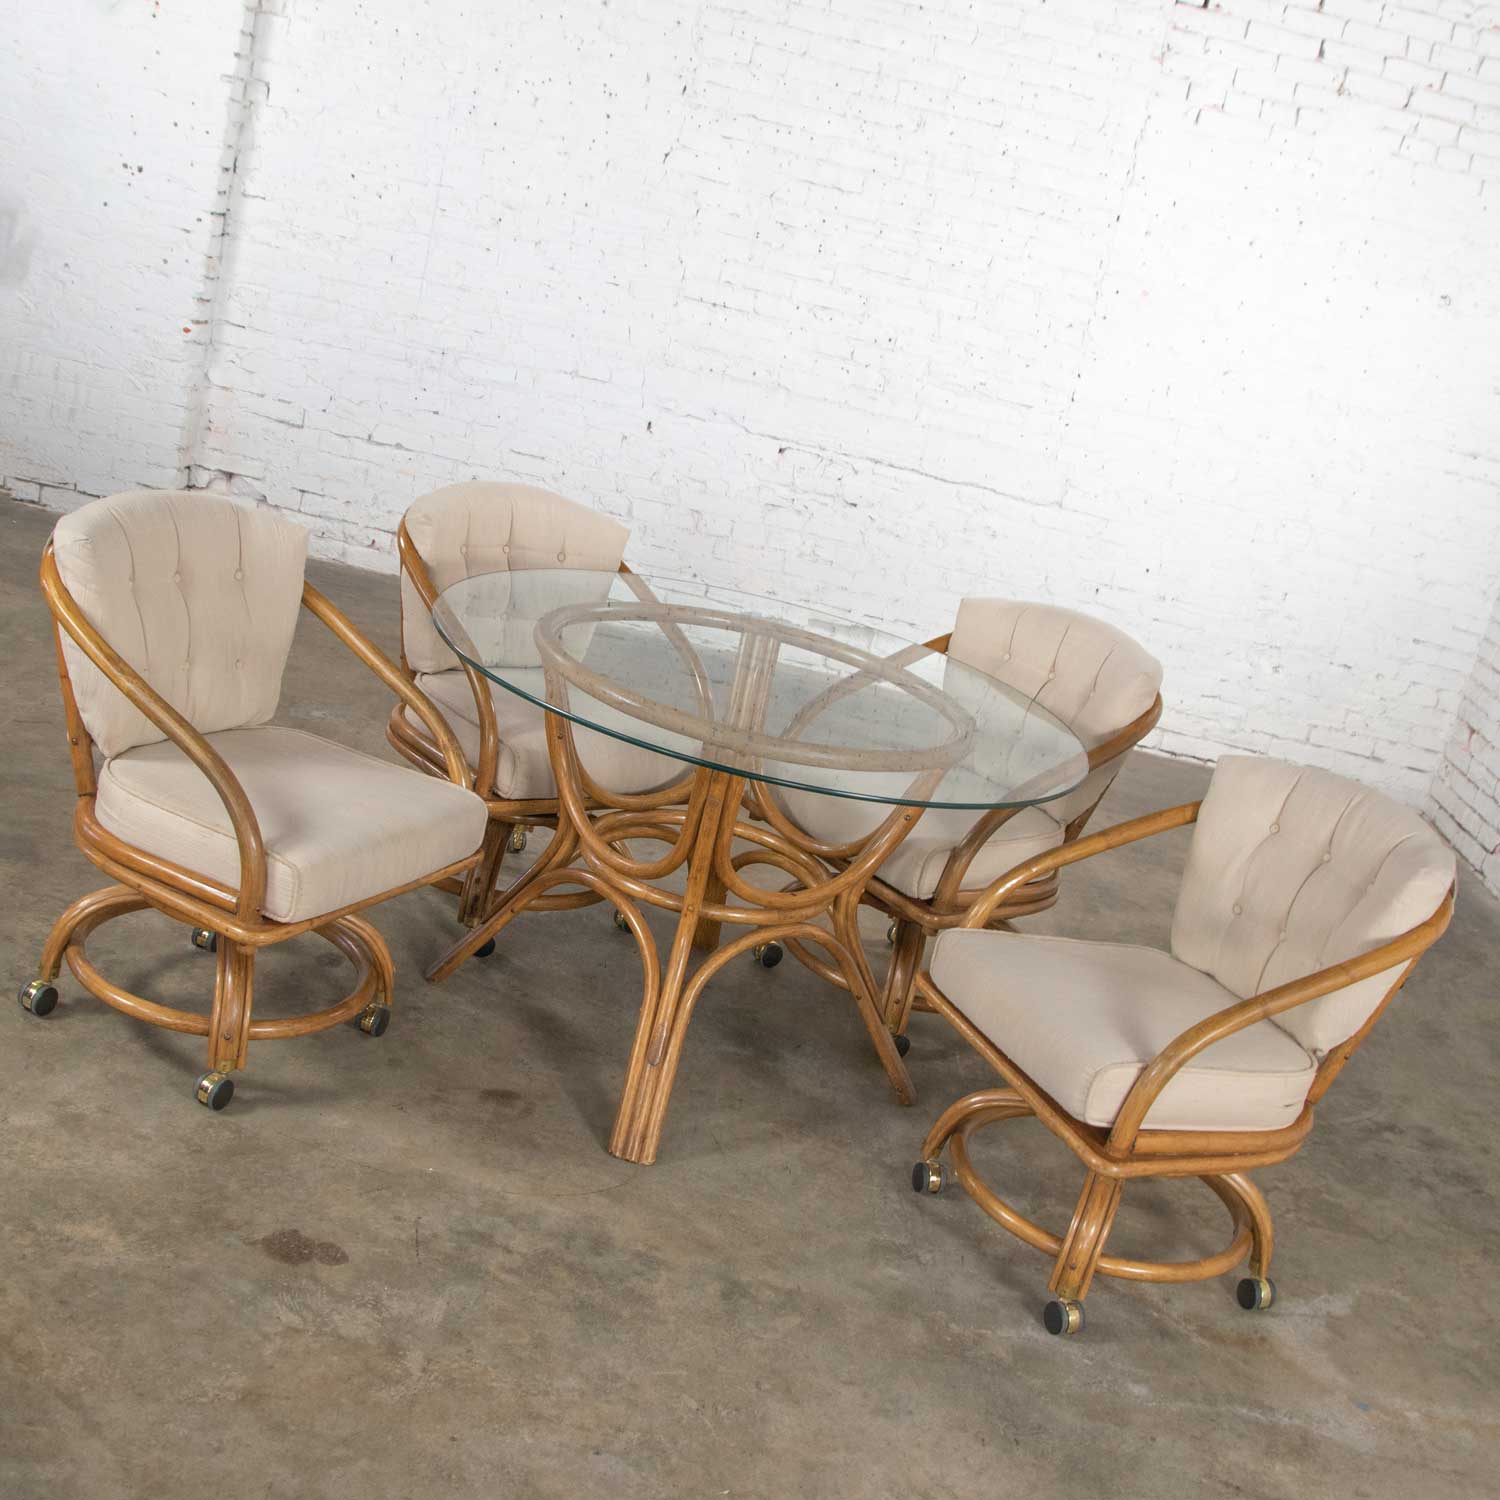 Vintage Rattan Game Table Set Round Glass Top Table & 4 Swivel Rolling Chairs 1970-1980